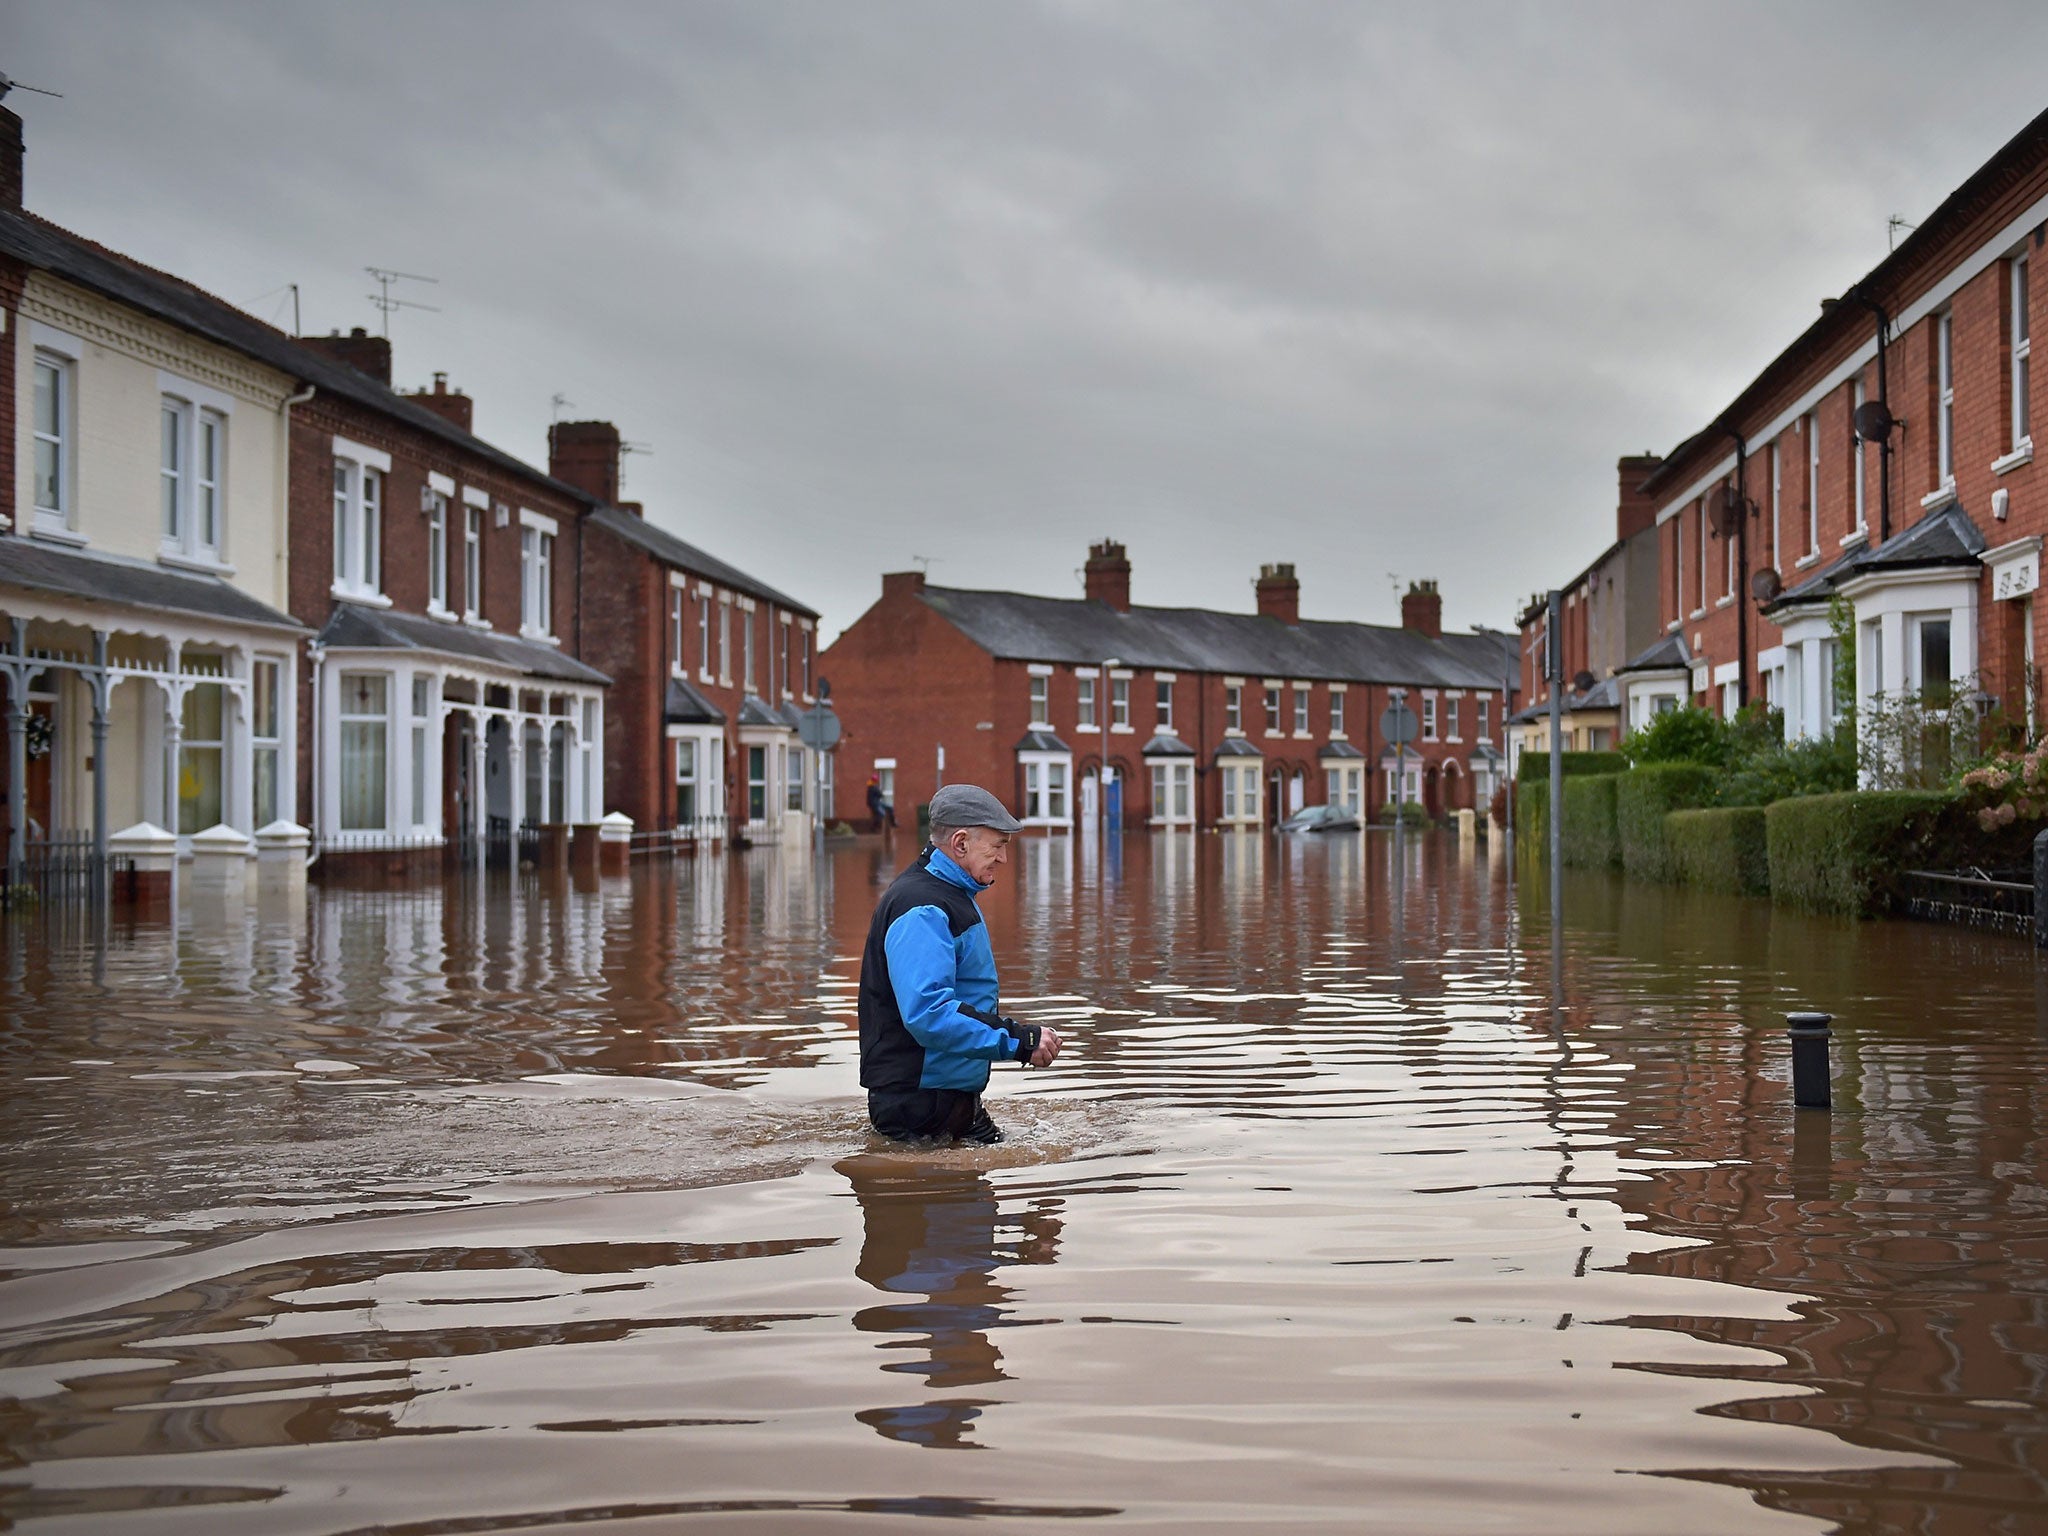 Local residents make their way through the flood water as they continue to leave their homes after severe flooding in Carlisle